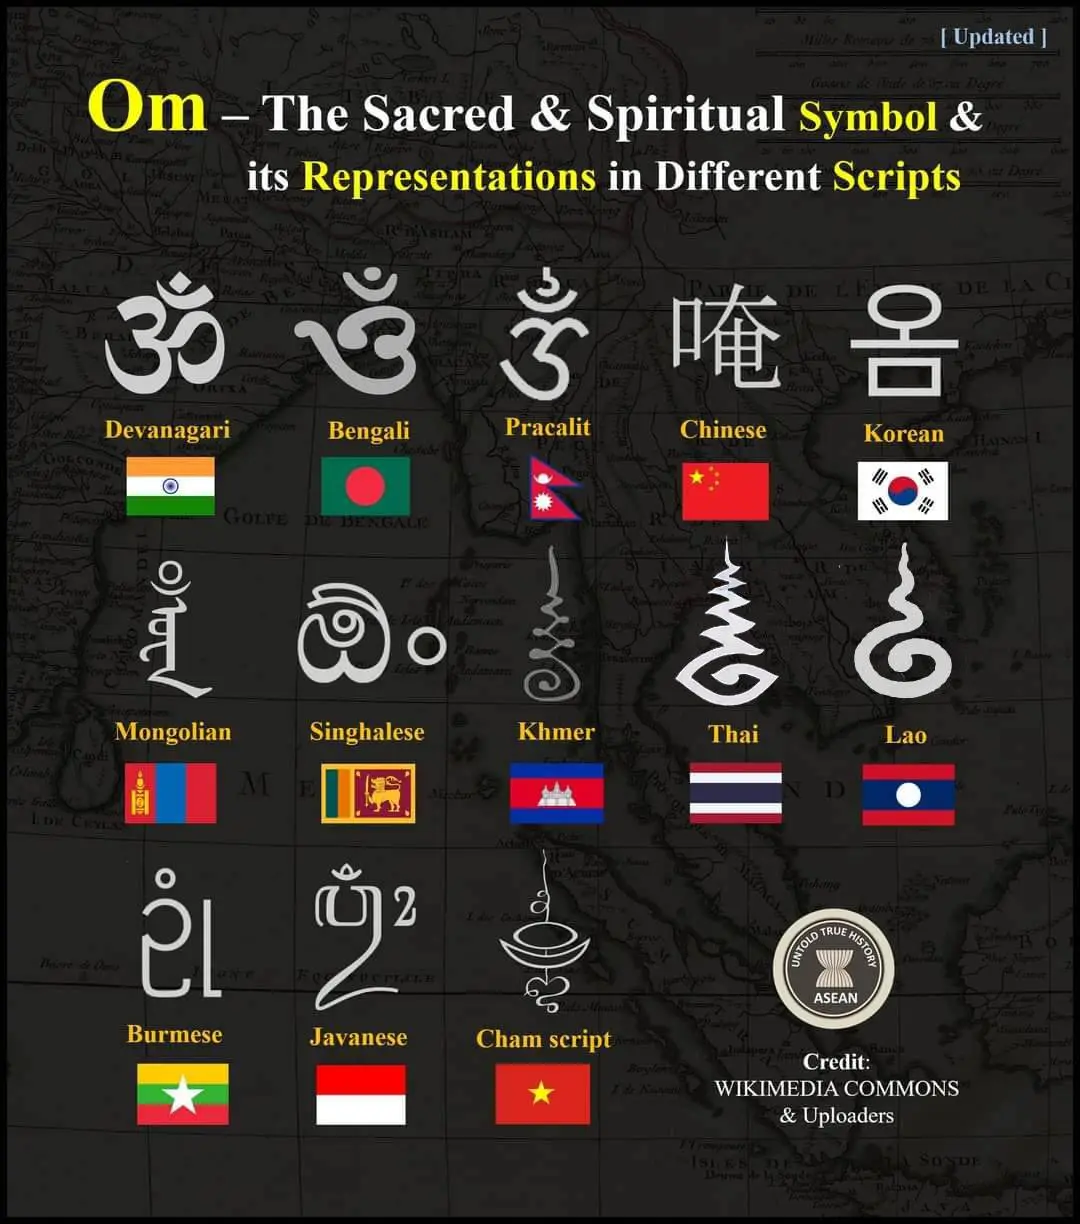 The Similarities of Ancient Symbols in Asia!🧡